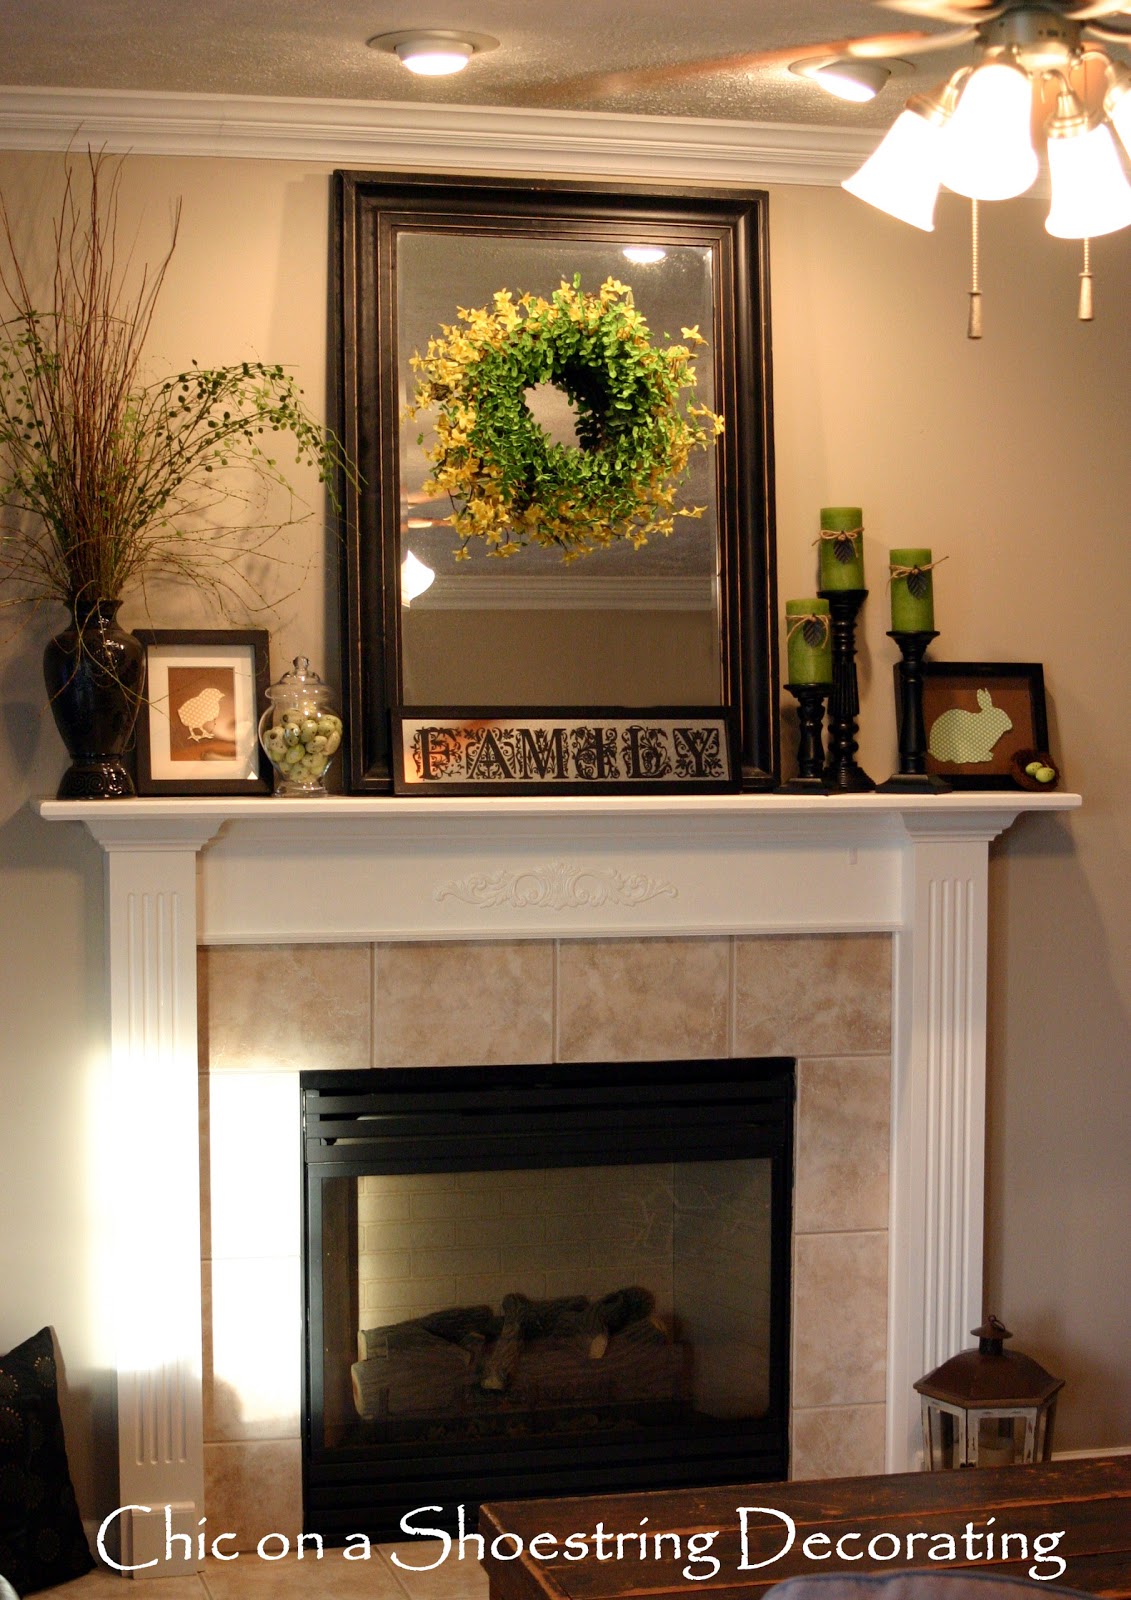 44 Top Pictures Decorating A Large Mantle / Tips to Make Fireplace Mantel Décor for a Wedding Day ...